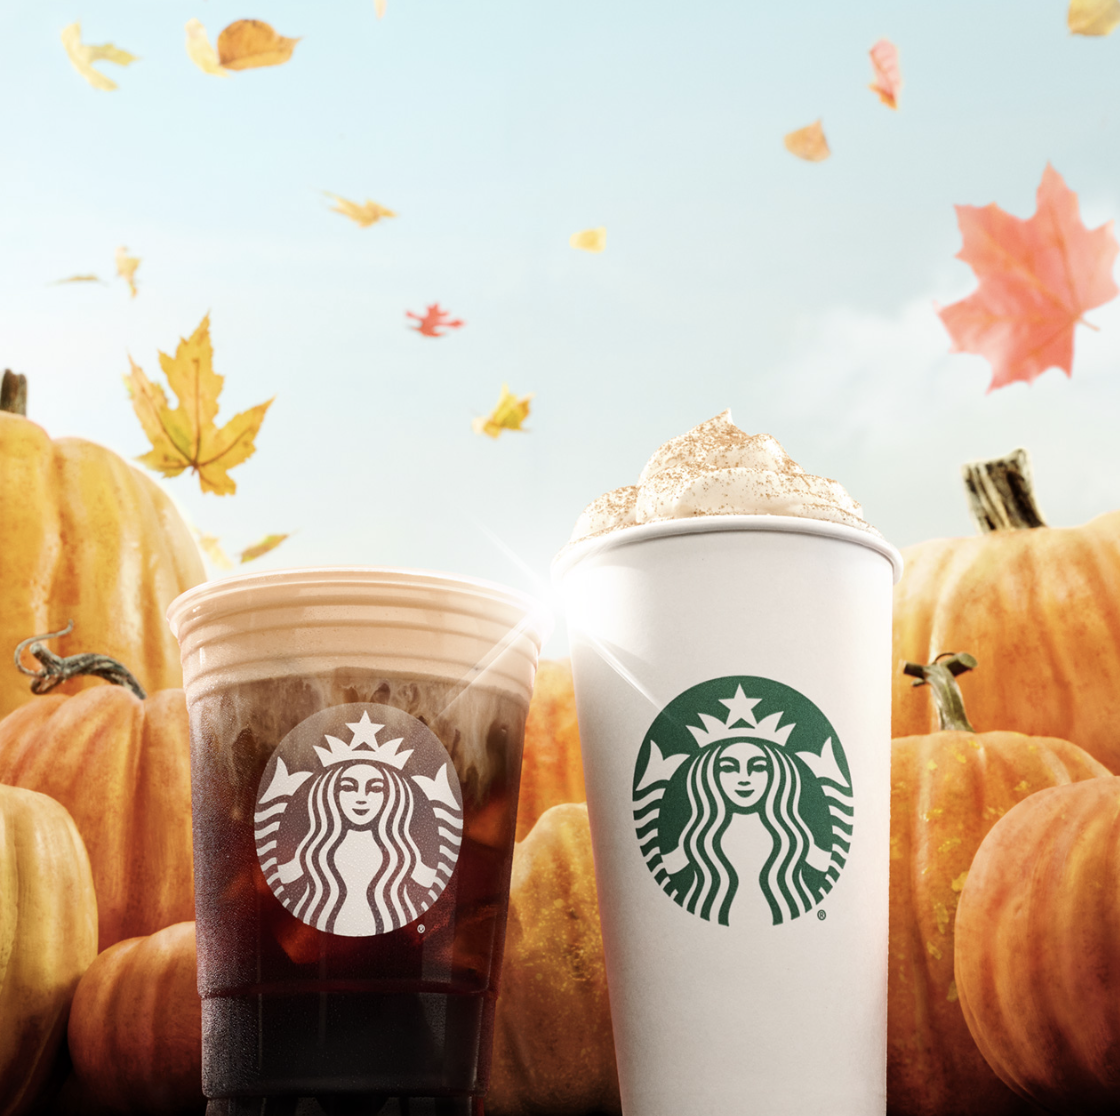 The Fall Starbucks Drinks Menu 2022 Is Back—Here's What to Order